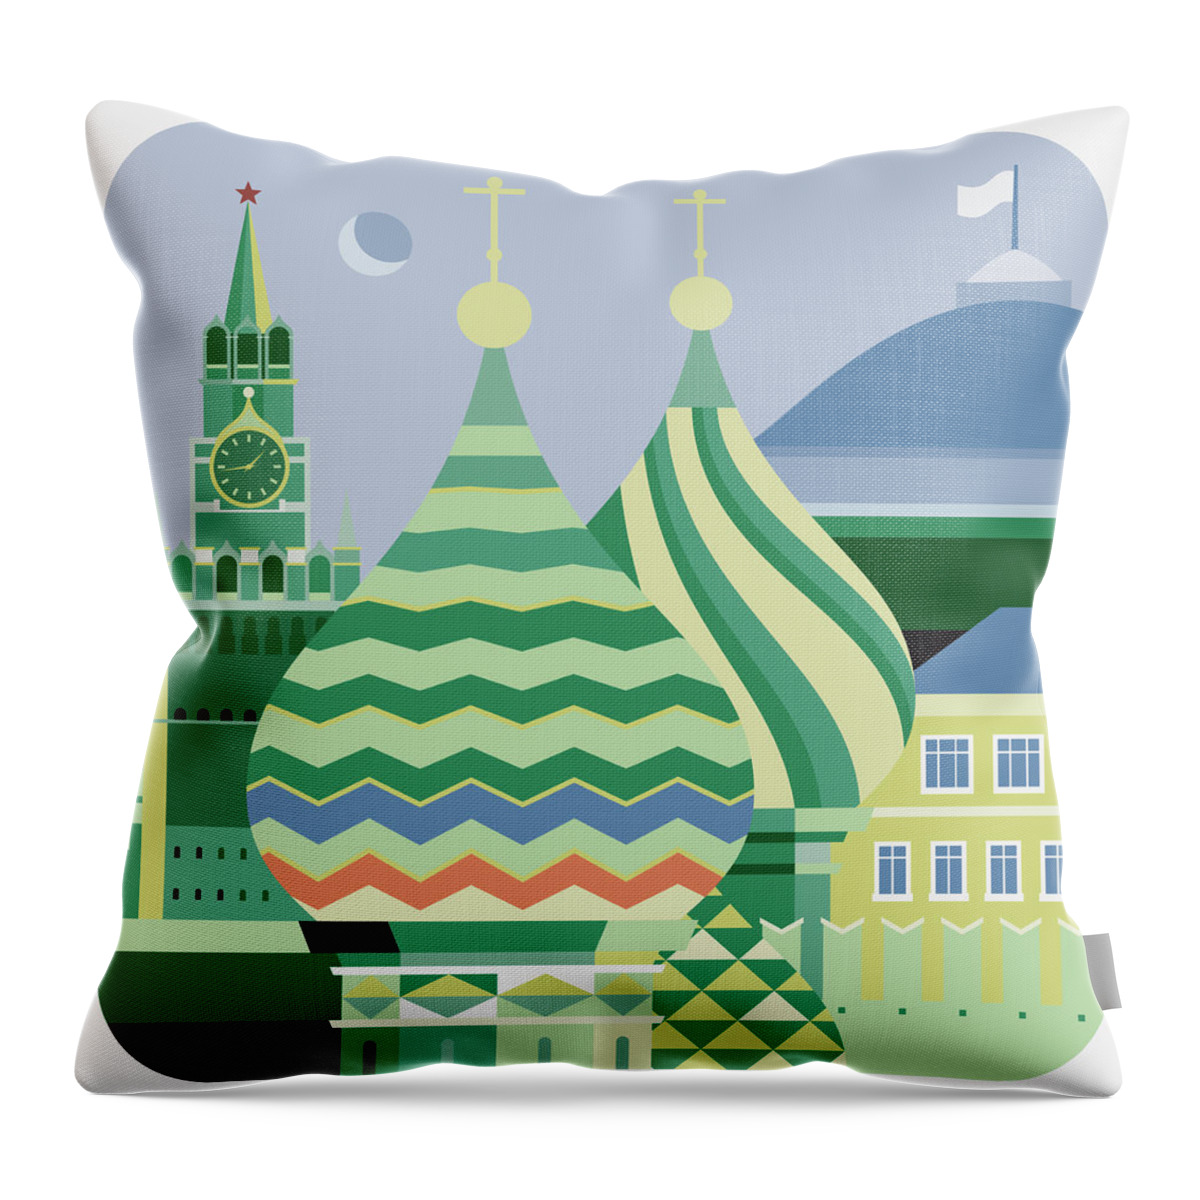 Outdoors Throw Pillow featuring the digital art Spires Of St Basils The Blessed by Nigel Sandor